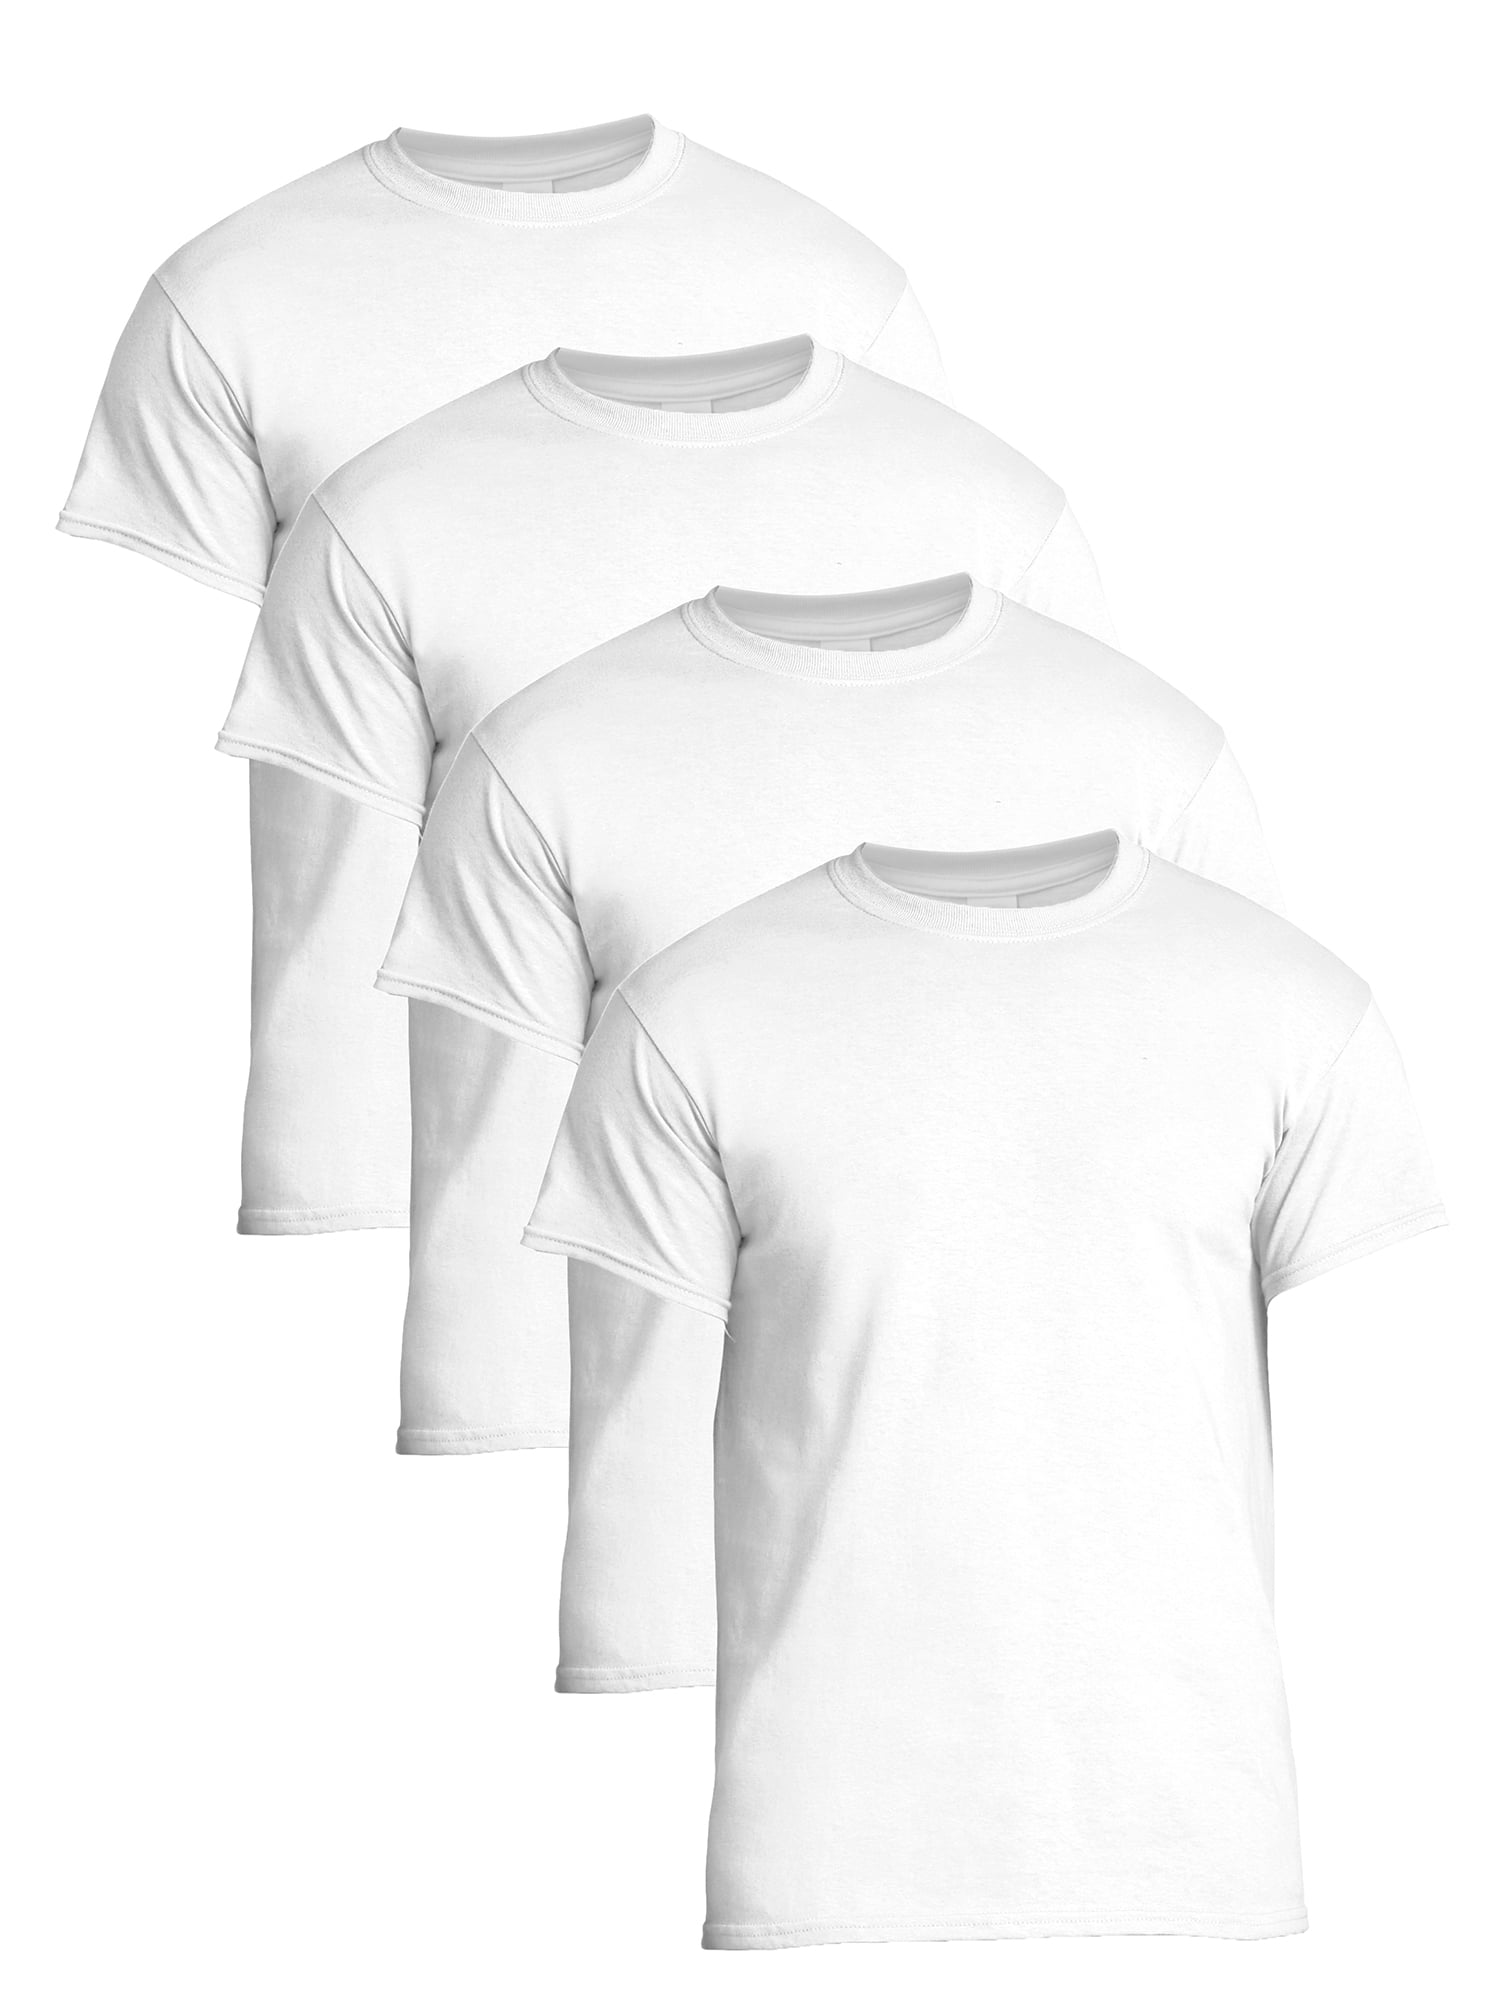 Gildan Adult Short Sleeve Crew T-Shirt for Crafting - White, Adult Sizes S  - 3XL, Soft Cotton, Classic Fit, 1-Pack Blank Tee